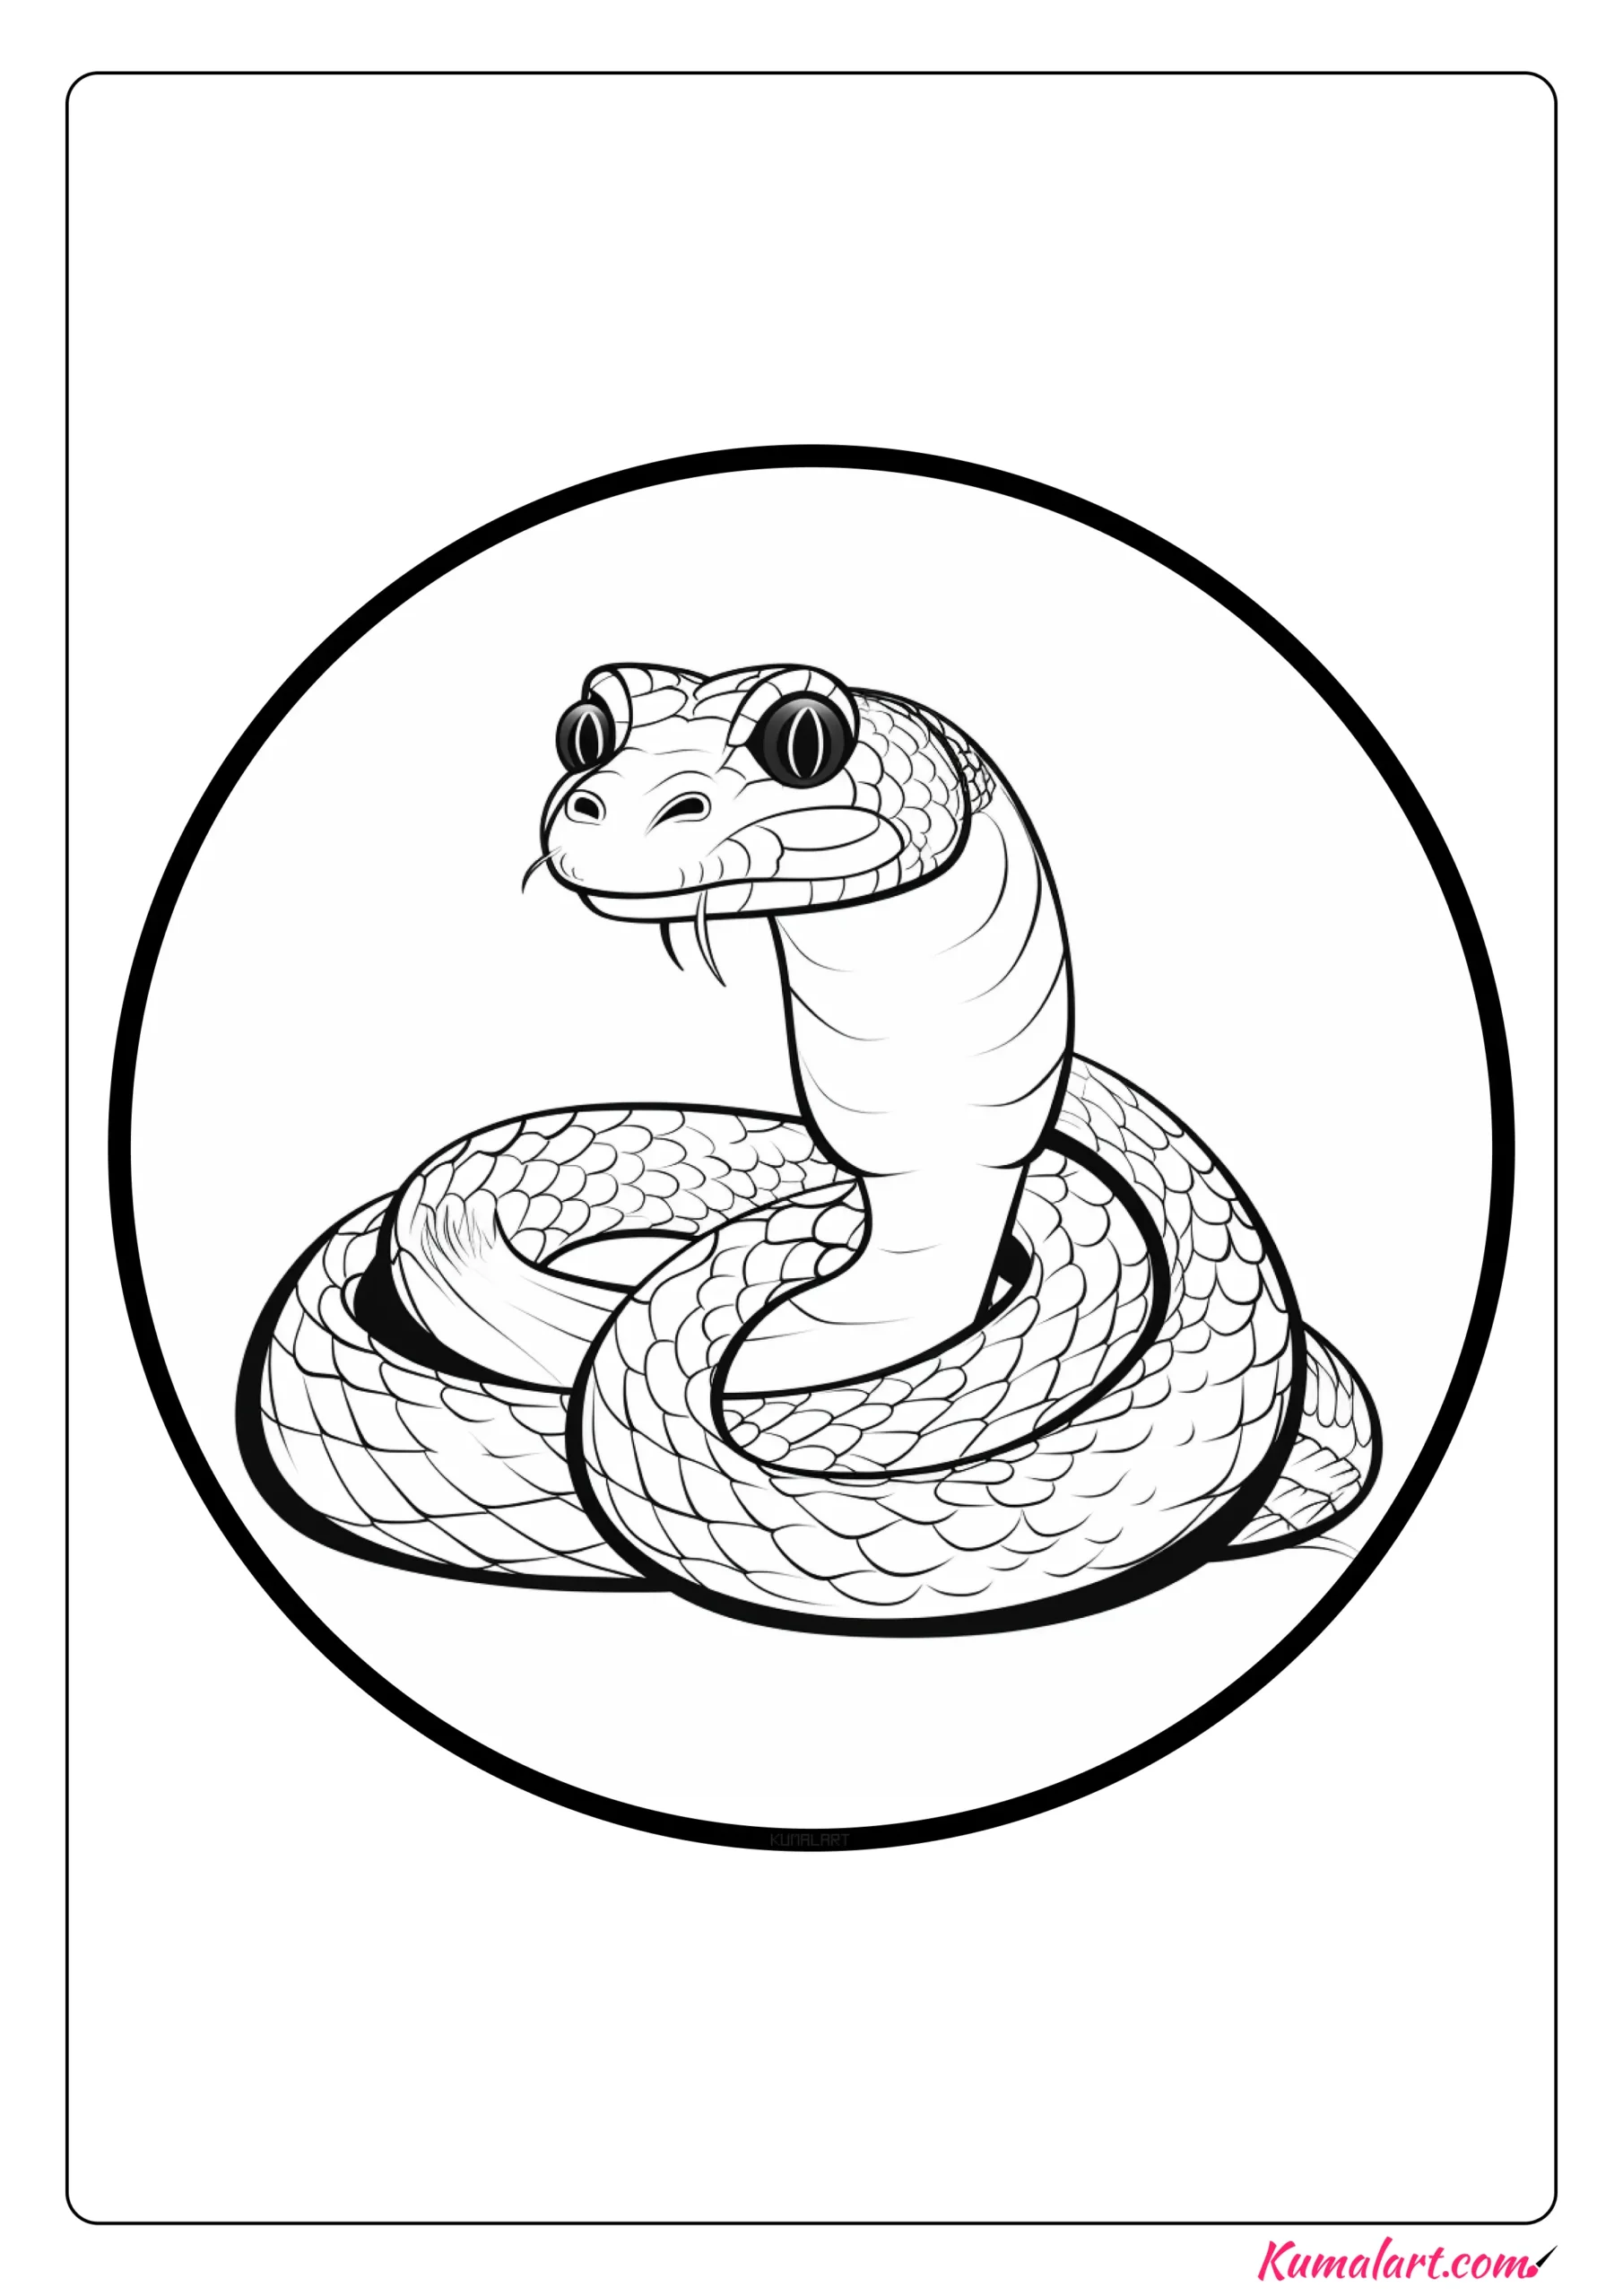 South American Rattle Snake Coloring Page